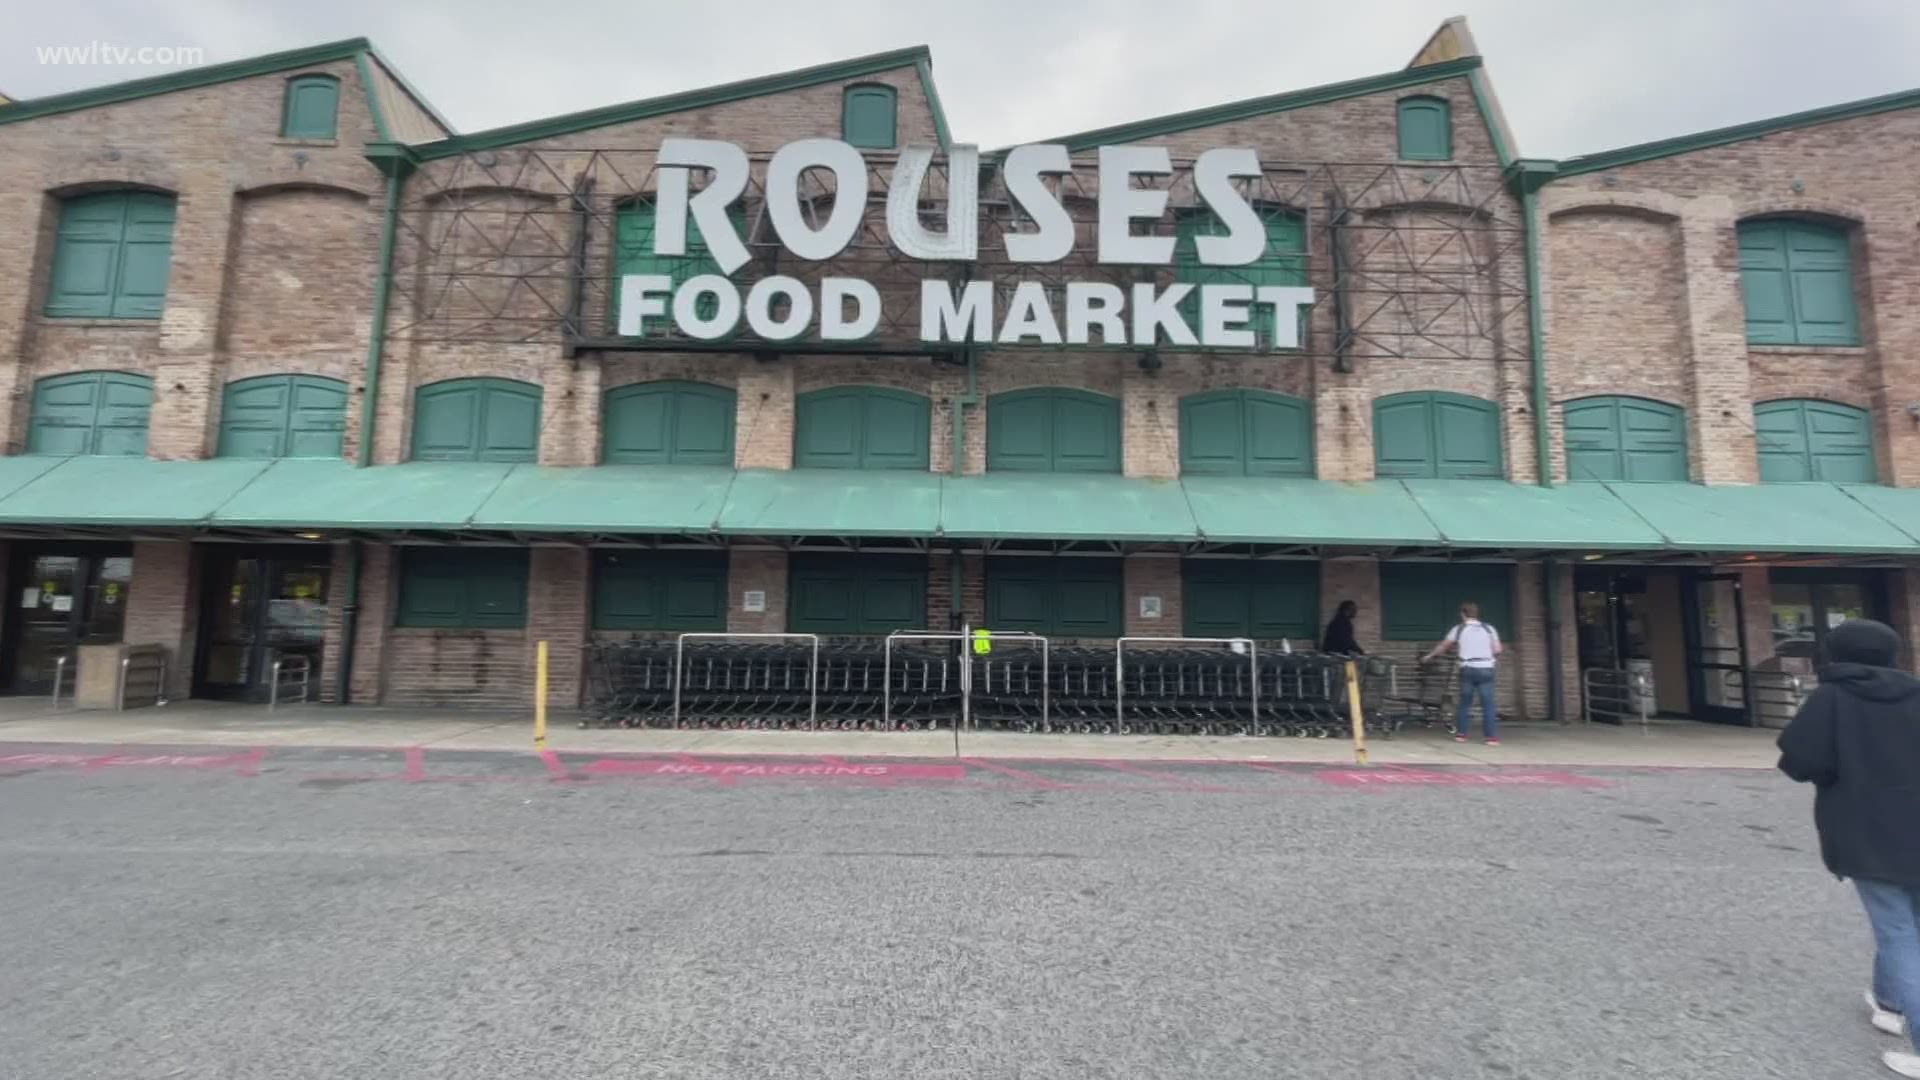 The retired owner of Rouses markets was captured at the Trump rally Thursday. Several customers were upset after seeing the post.